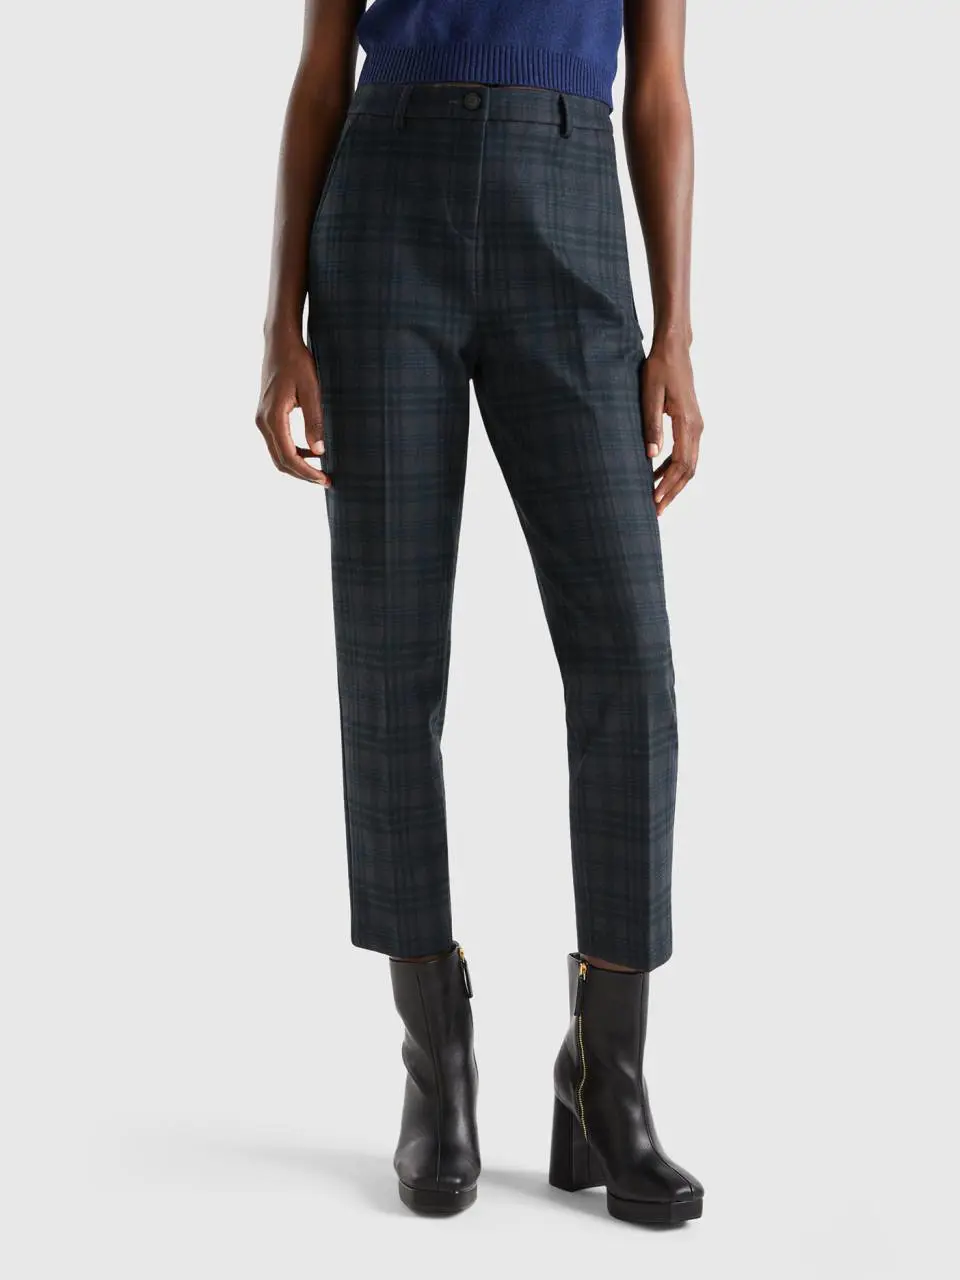 Benetton straight check trousers. 1